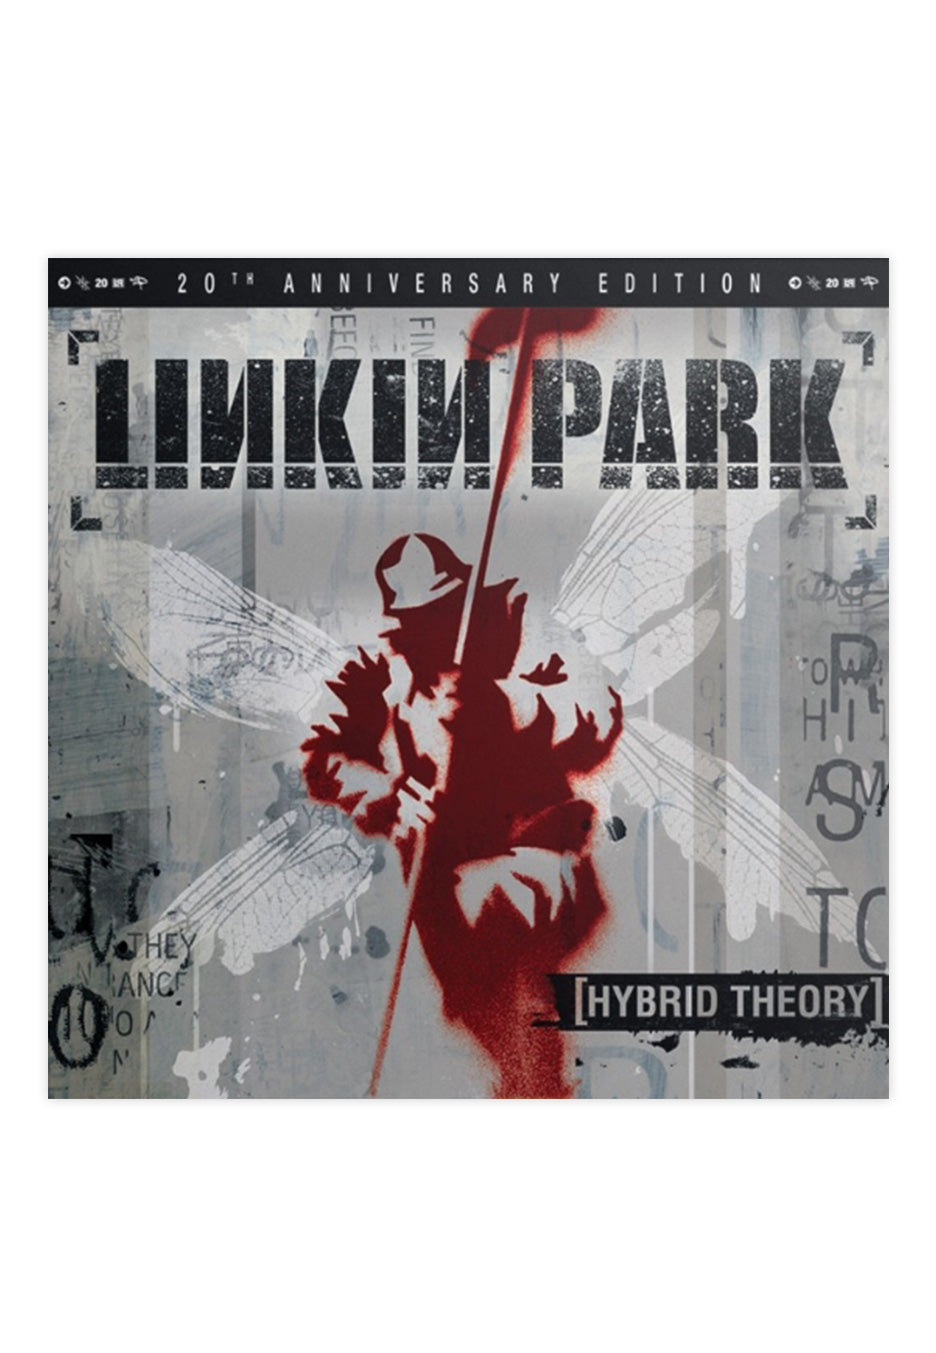 Linkin Park - Hybrid Theory (20th Anniversary Edition) Deluxe - 2 CD